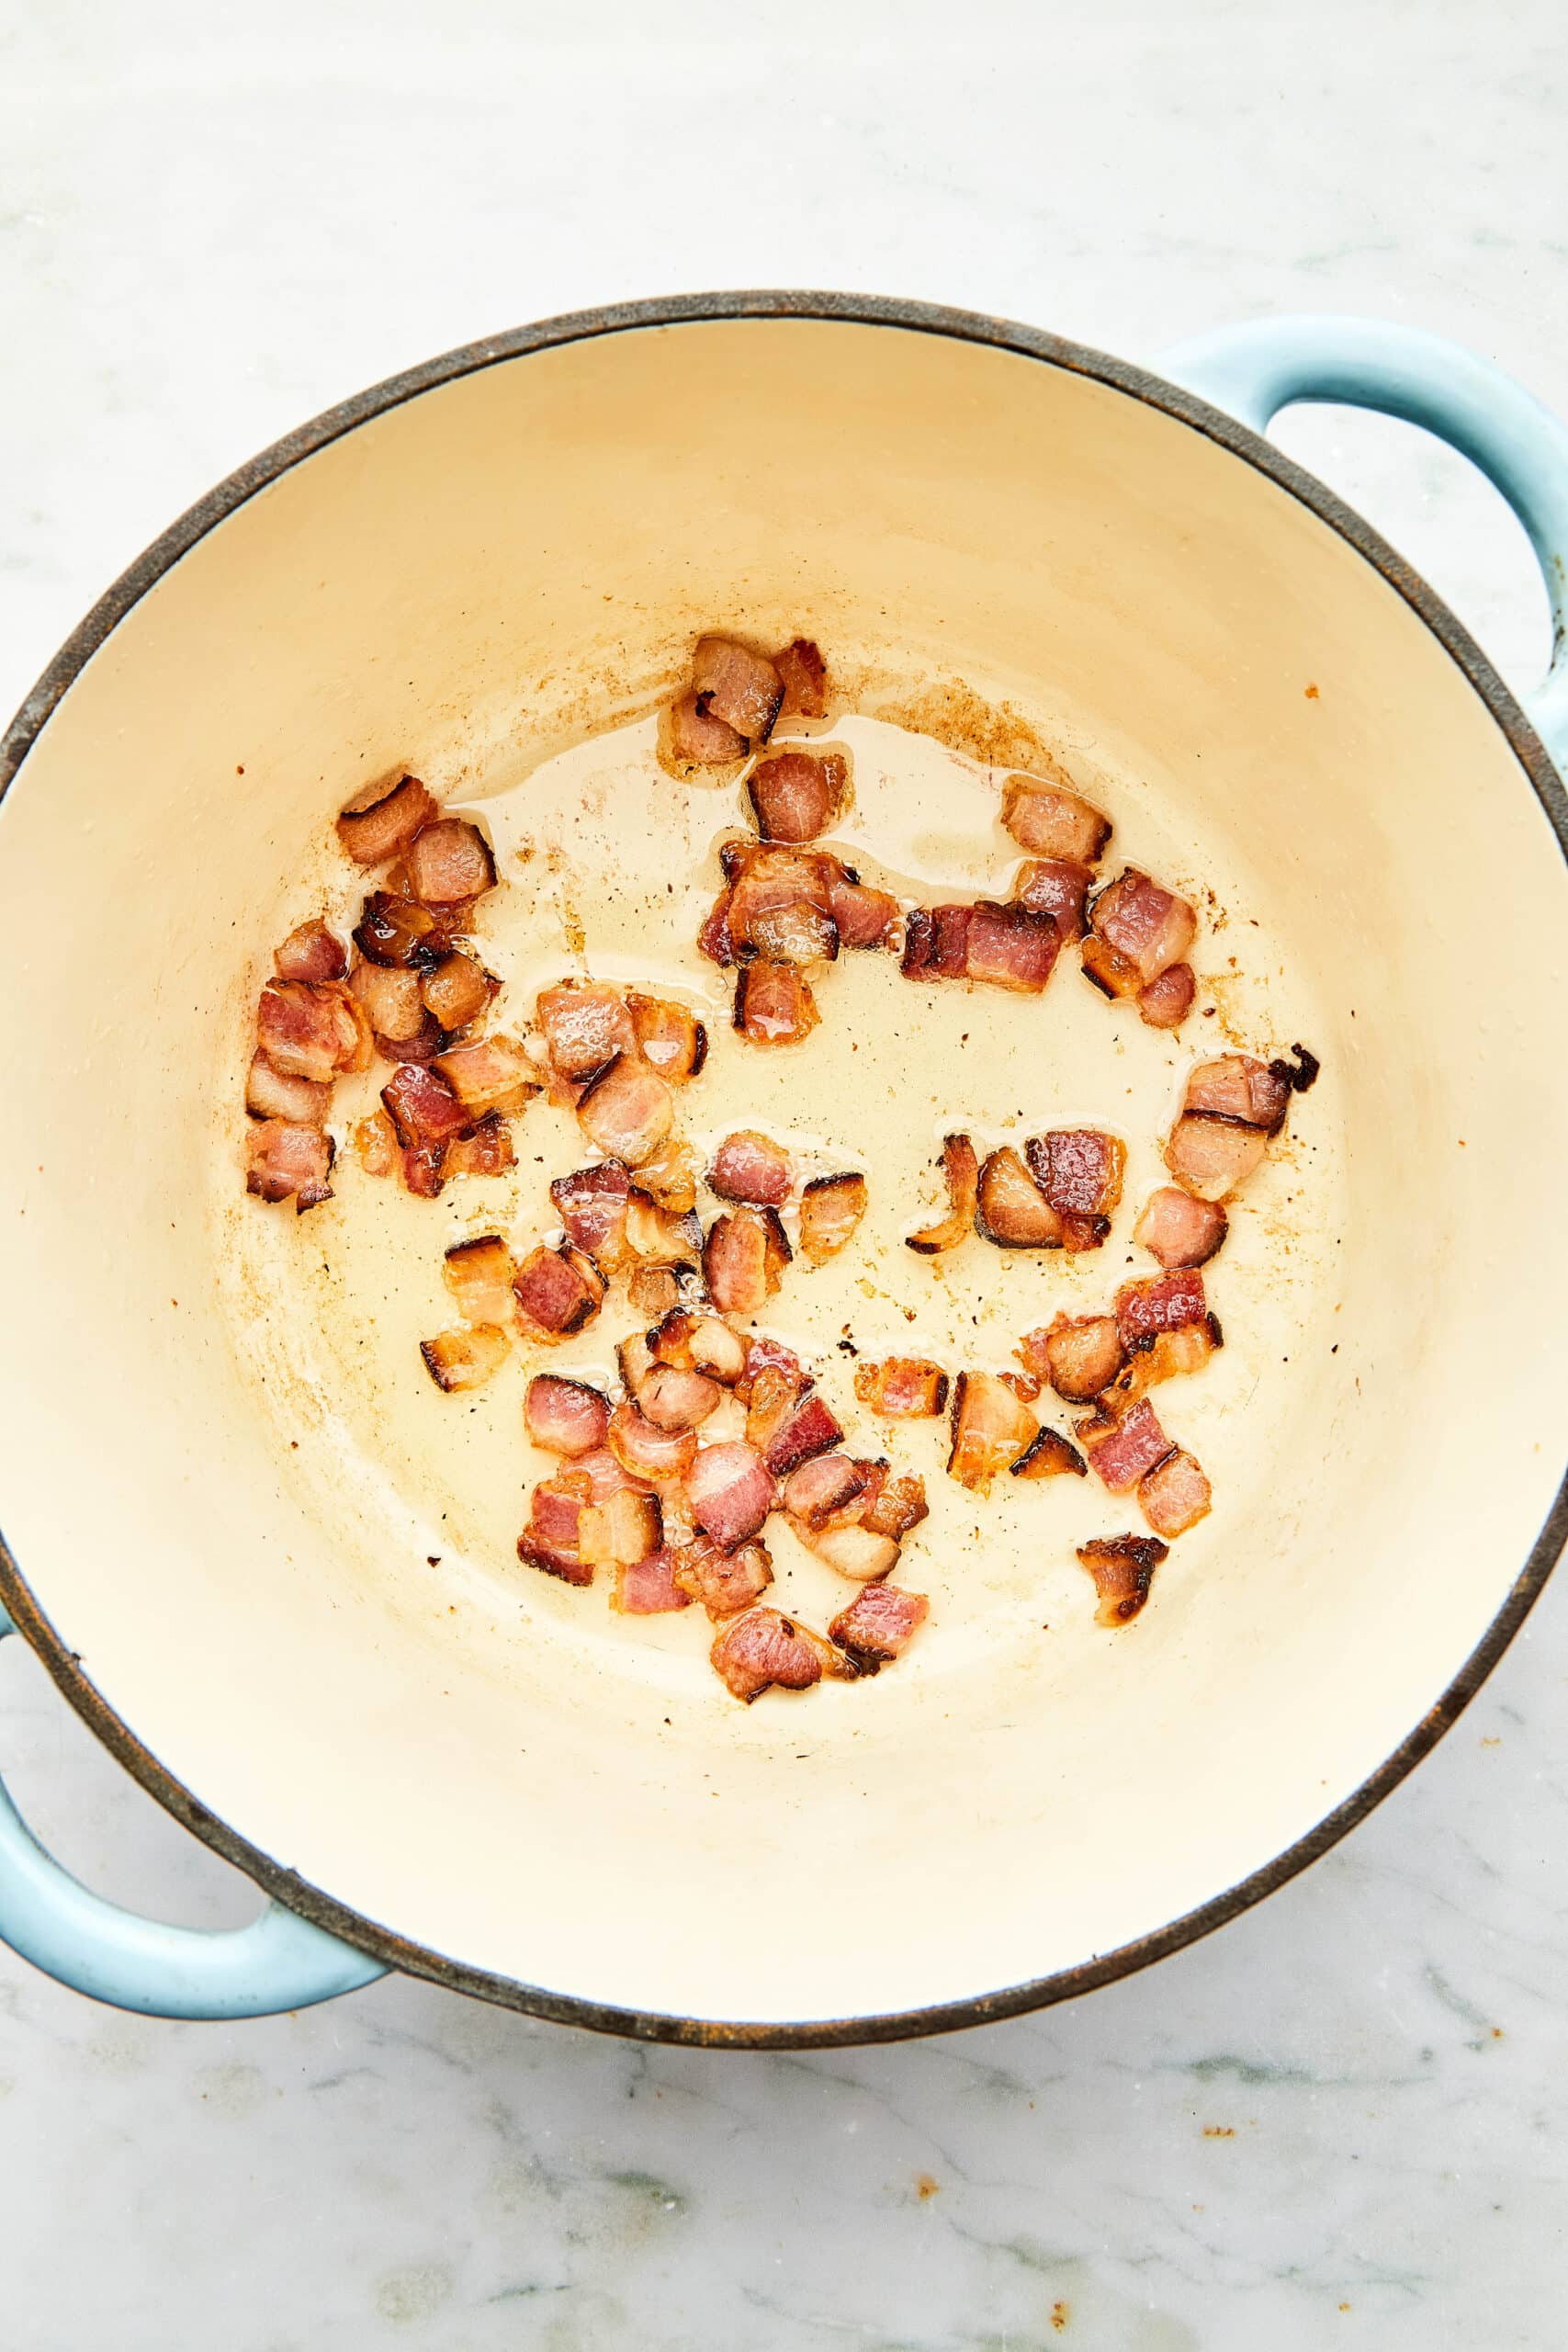 Chopped bacon cooking in a cast iron pot.